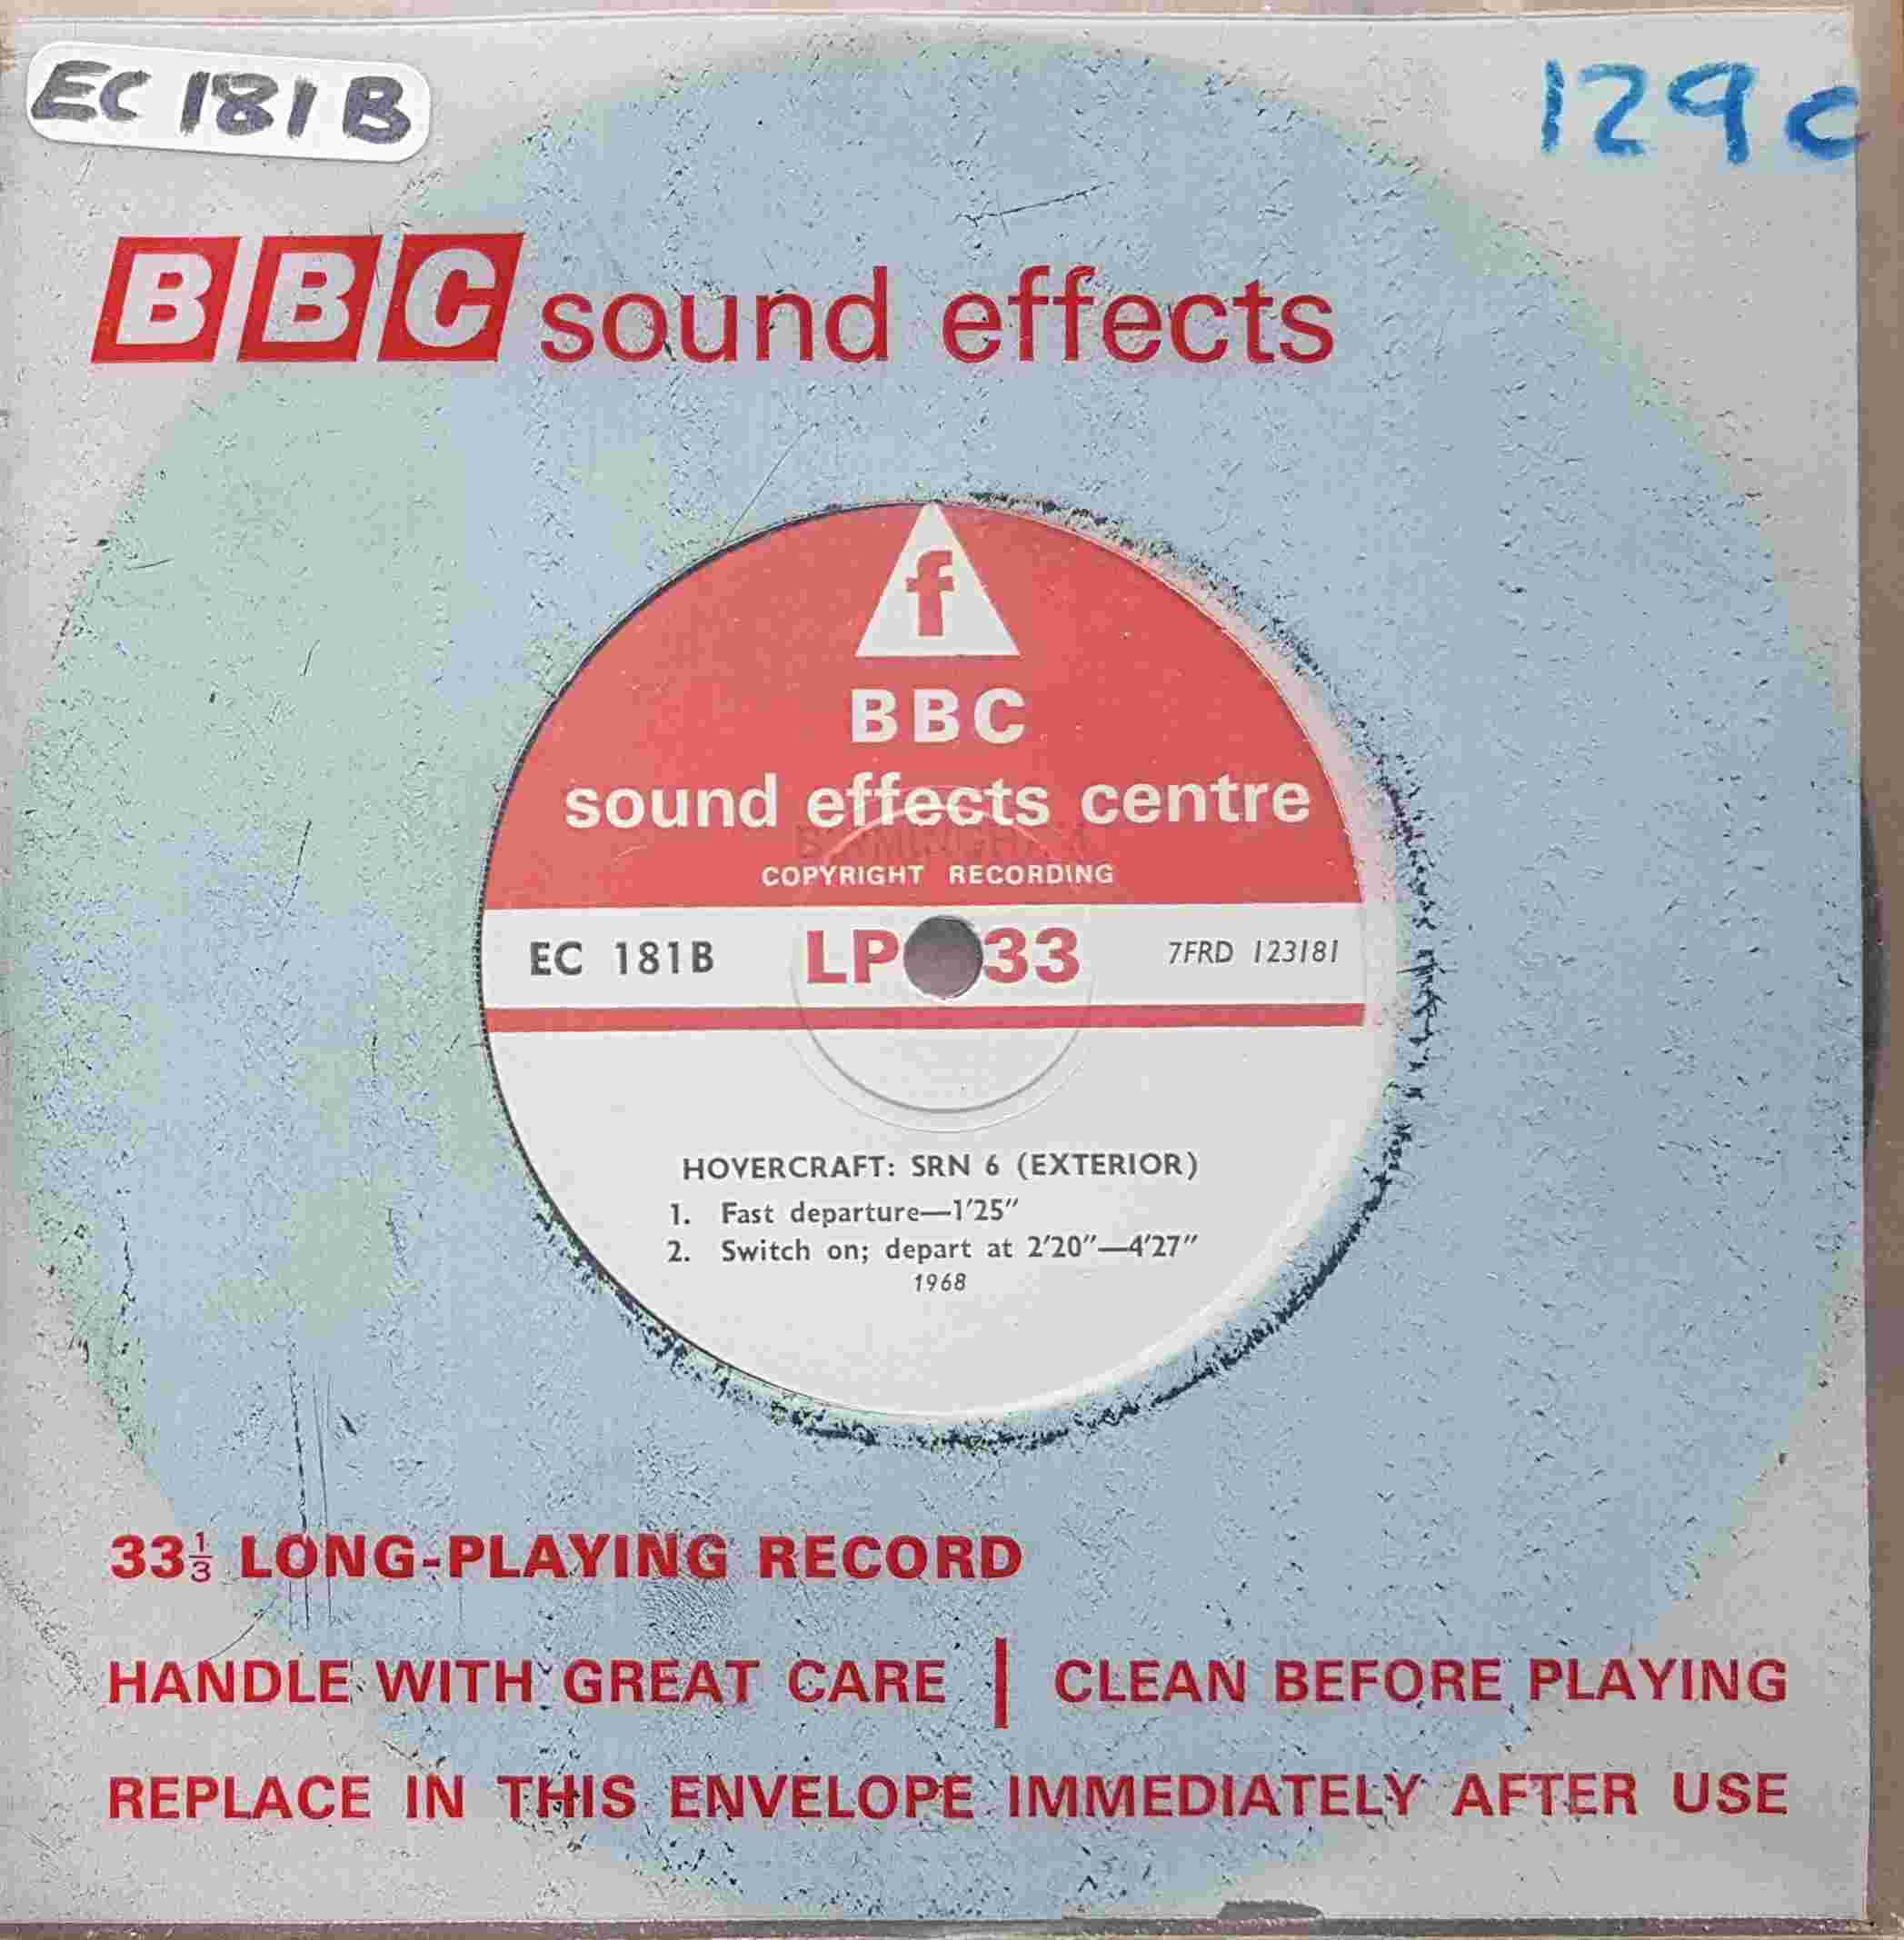 Picture of EC 181B Hovercraft: SRN 6 (Exterior) by artist Not registered from the BBC singles - Records and Tapes library